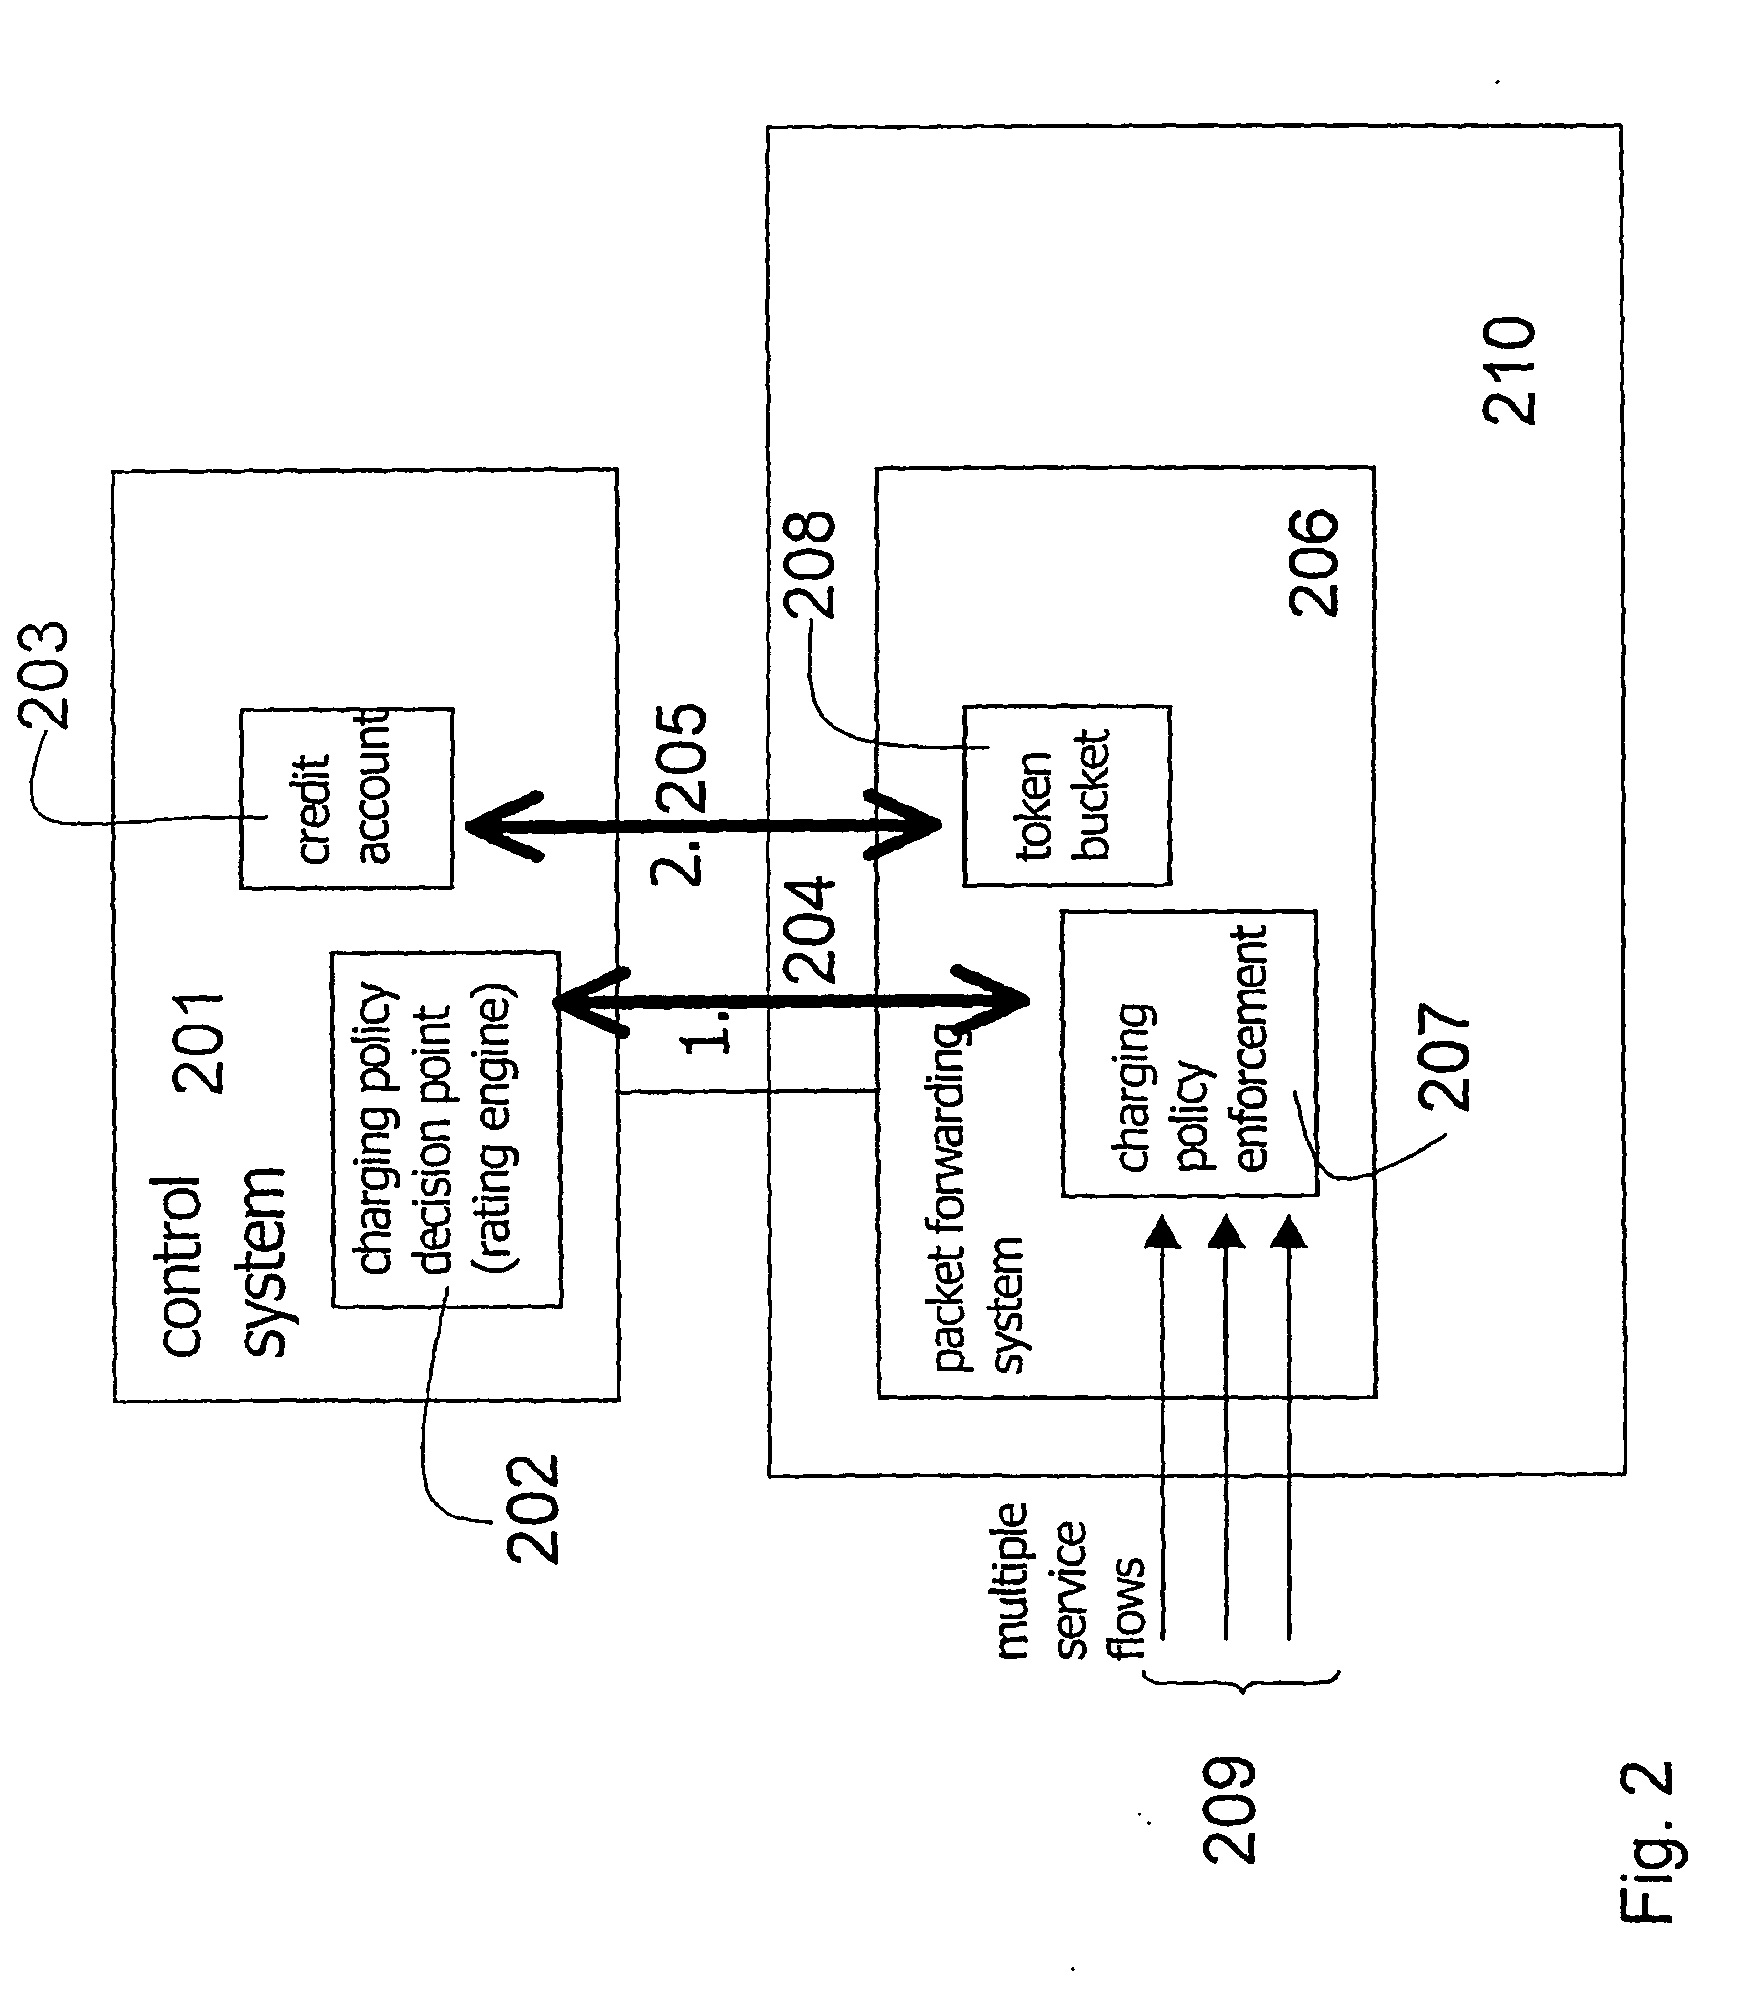 System for providing flexible charging in a network